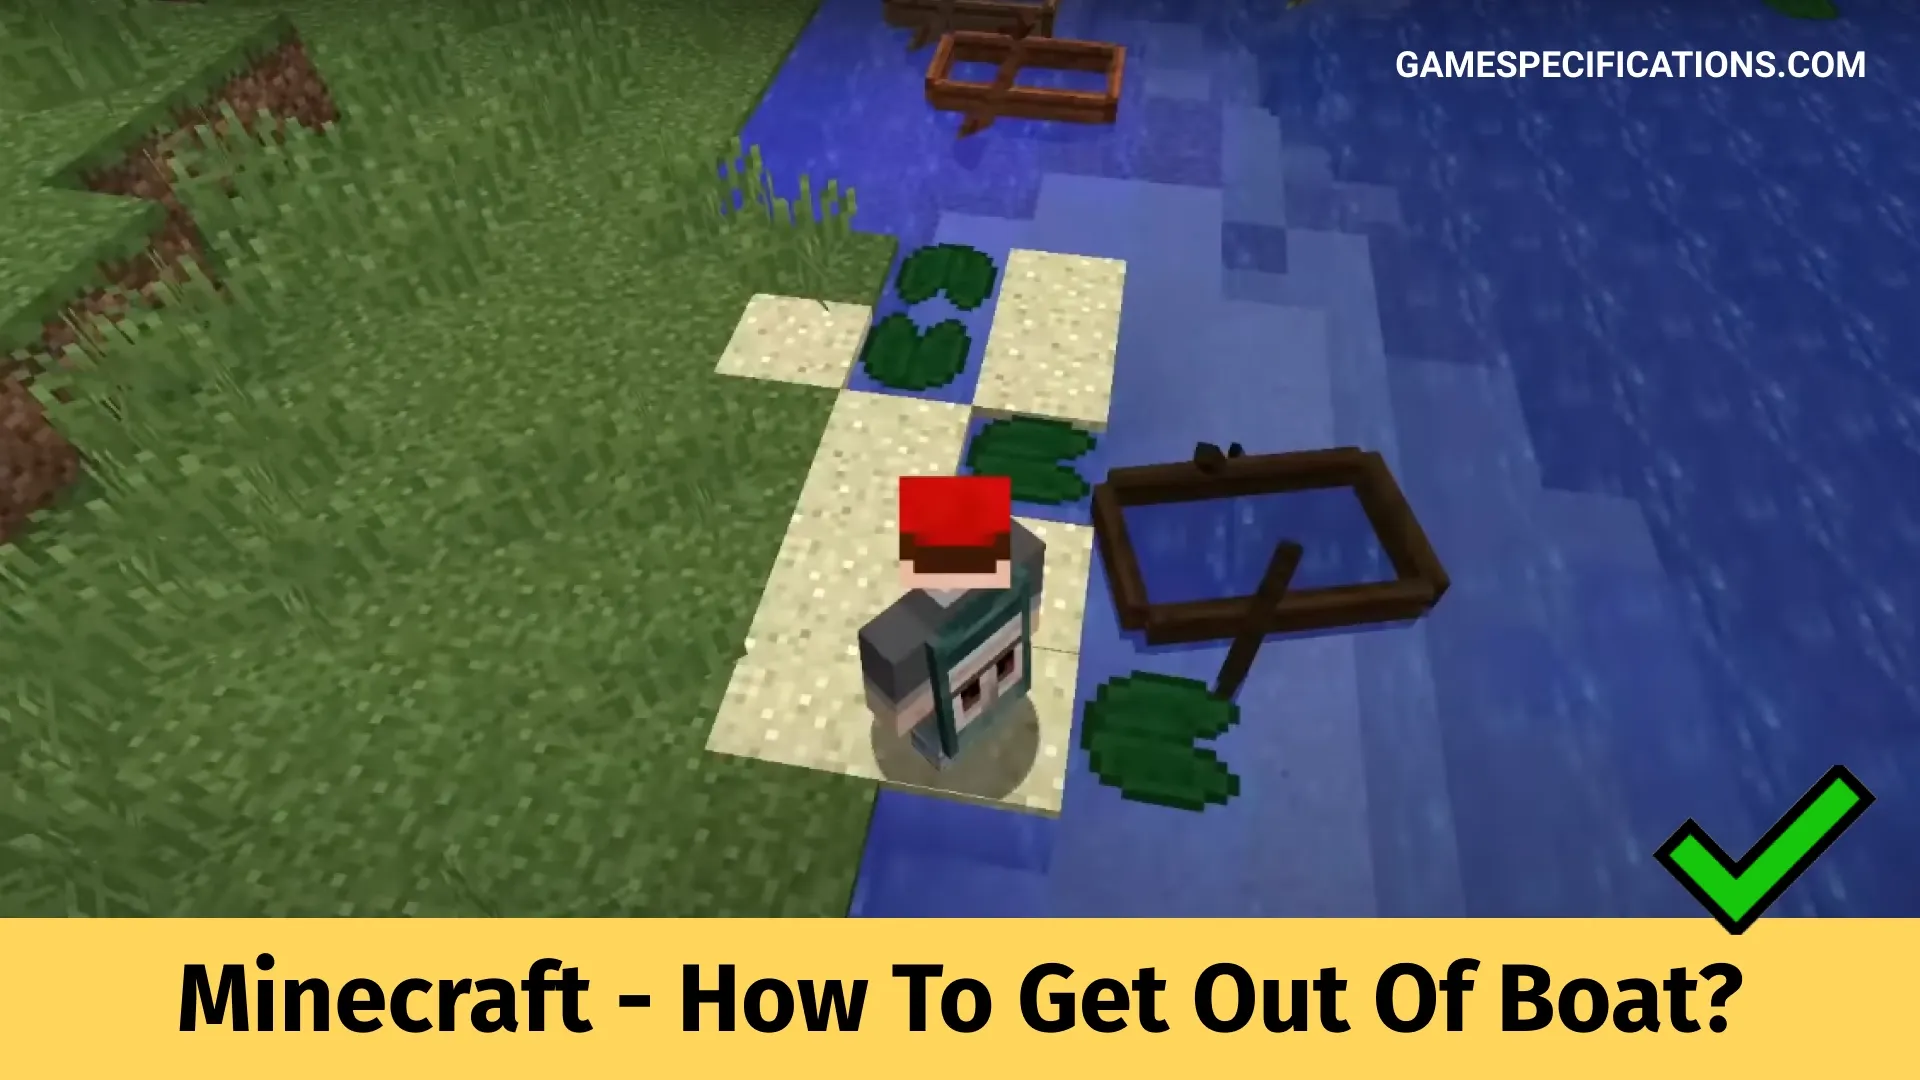 How To Get Out Of Boat Minecraft Game Specifications